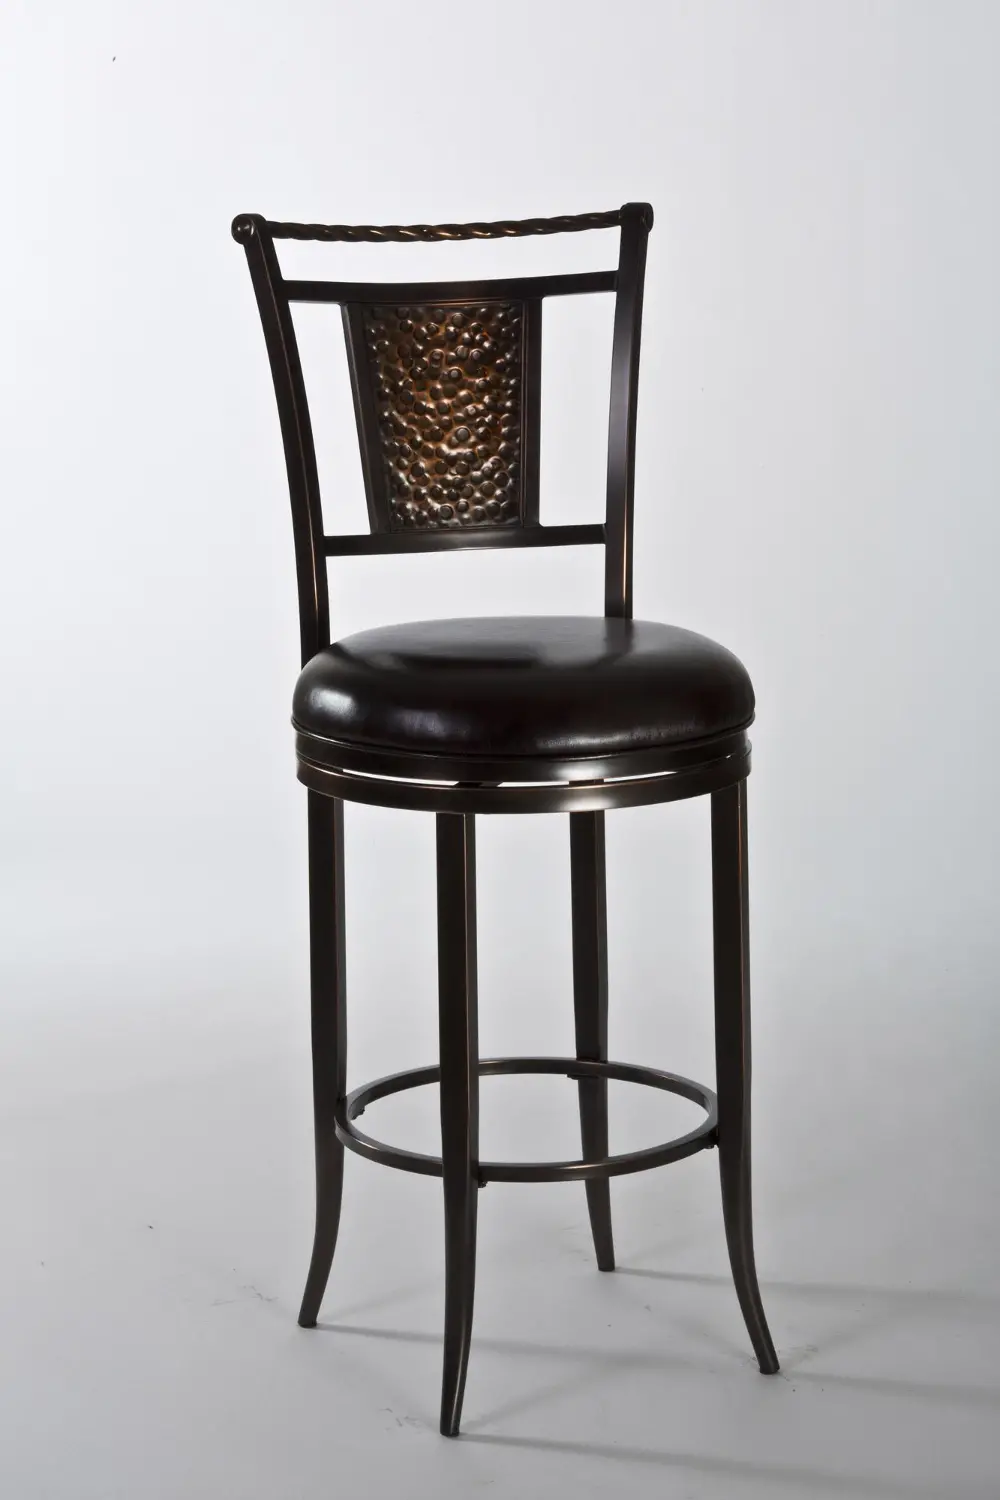 Black and Copper Swivel Counter Height Stool - Parkside -1